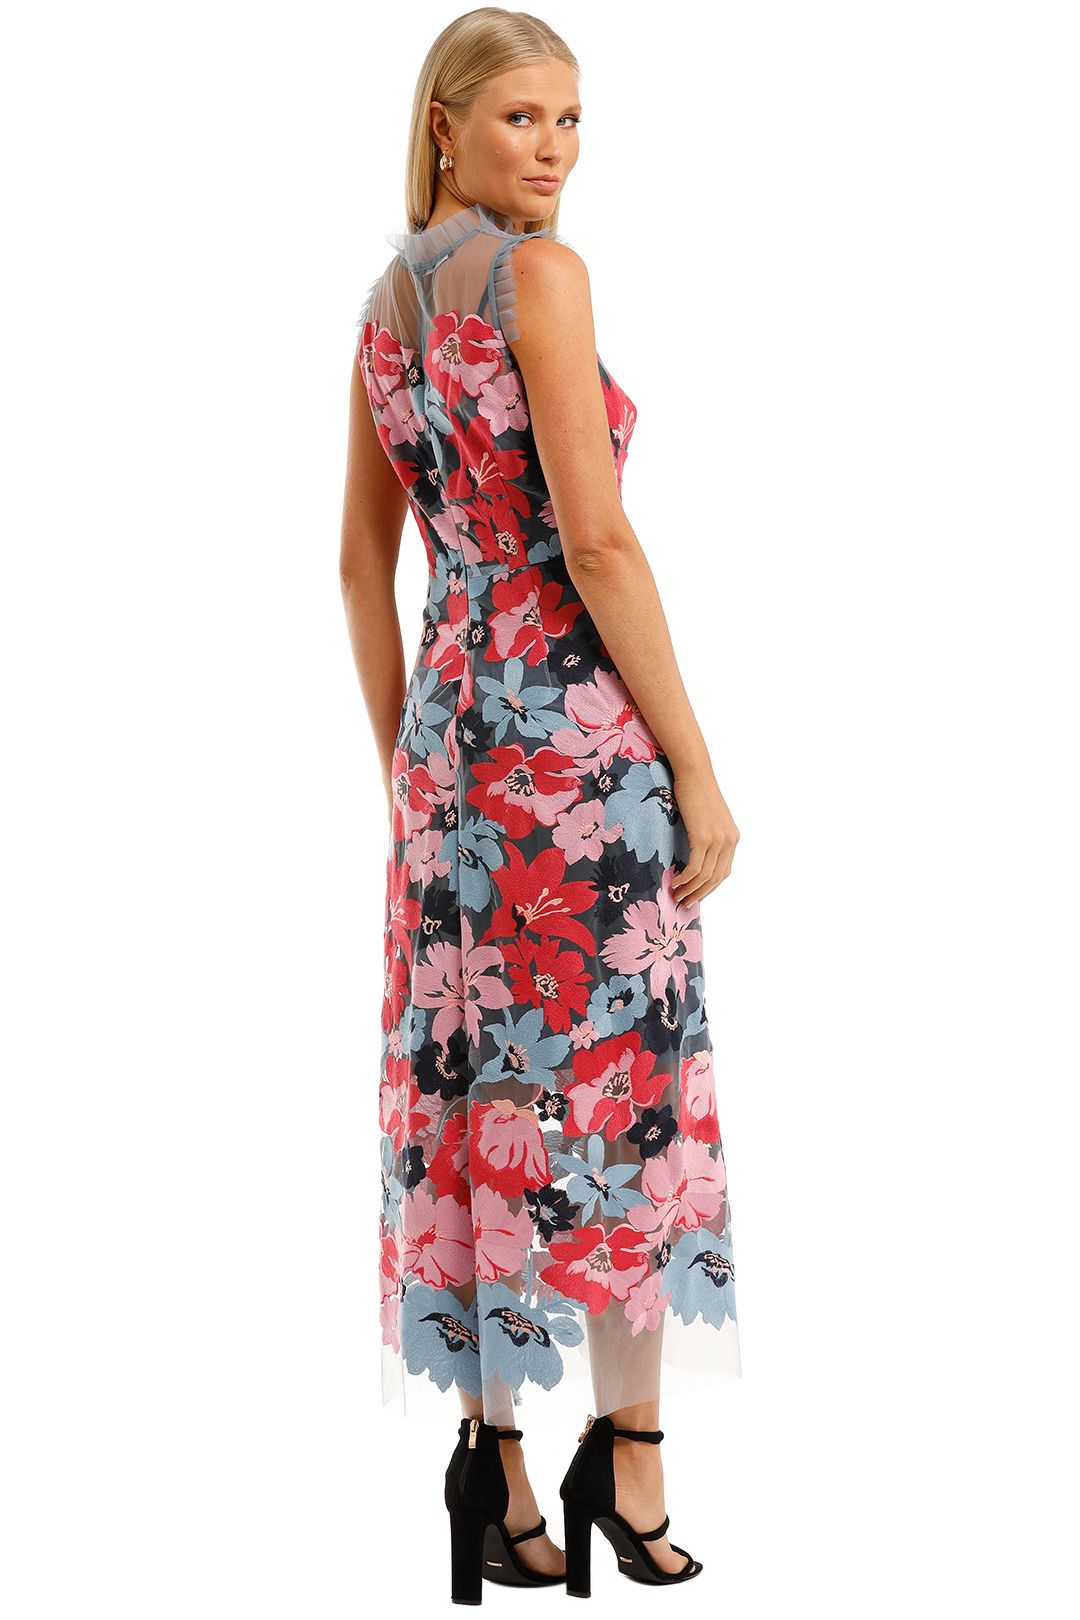 Moss-and-Spy-Bianca-Dress-Floral-Back